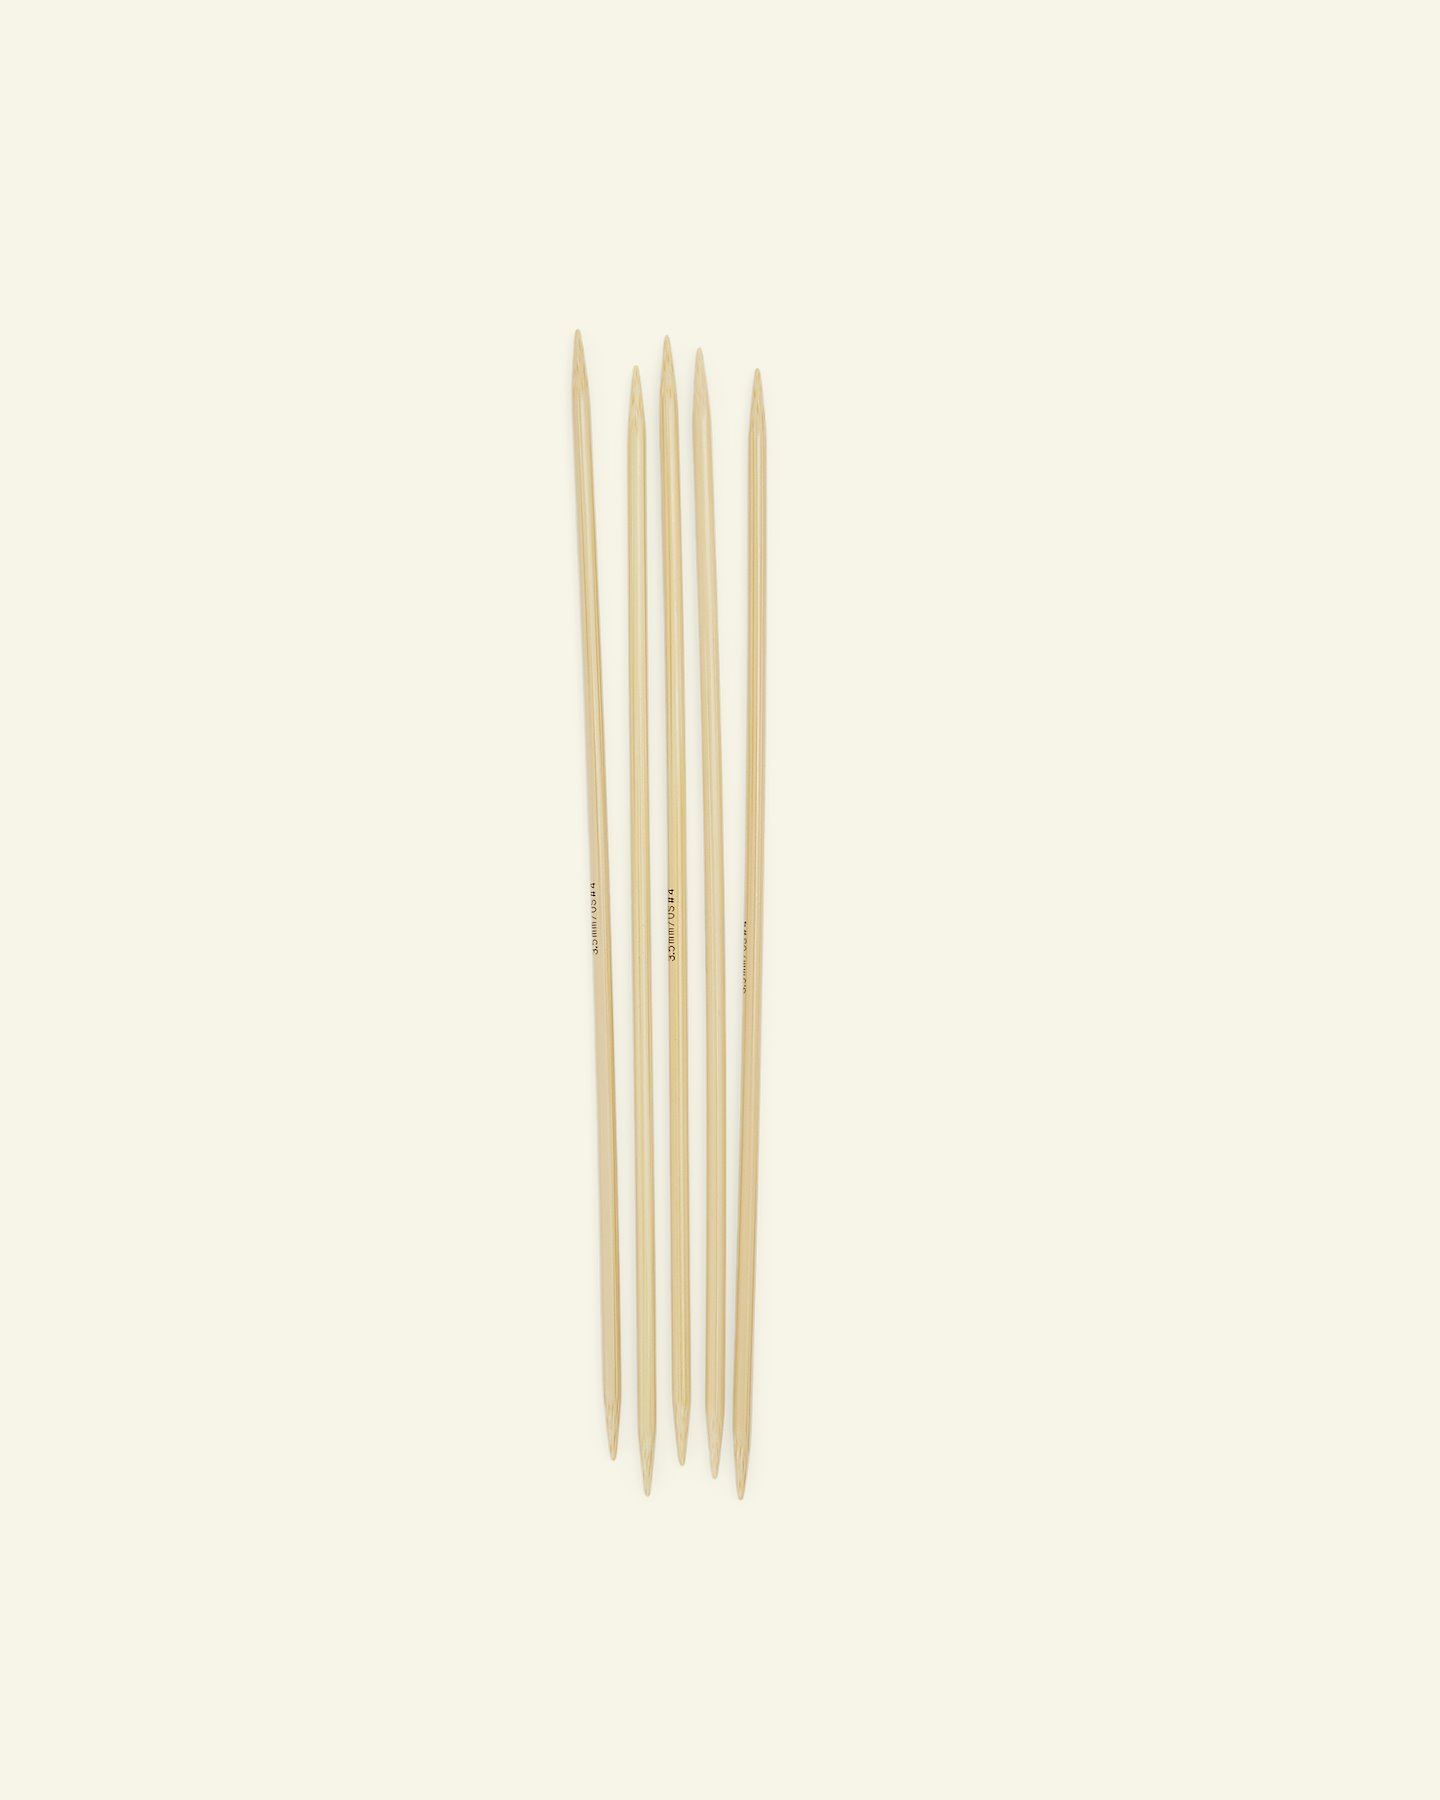 Addi dbl point. needle bamboo 20cm 3,5mm 83275_pack